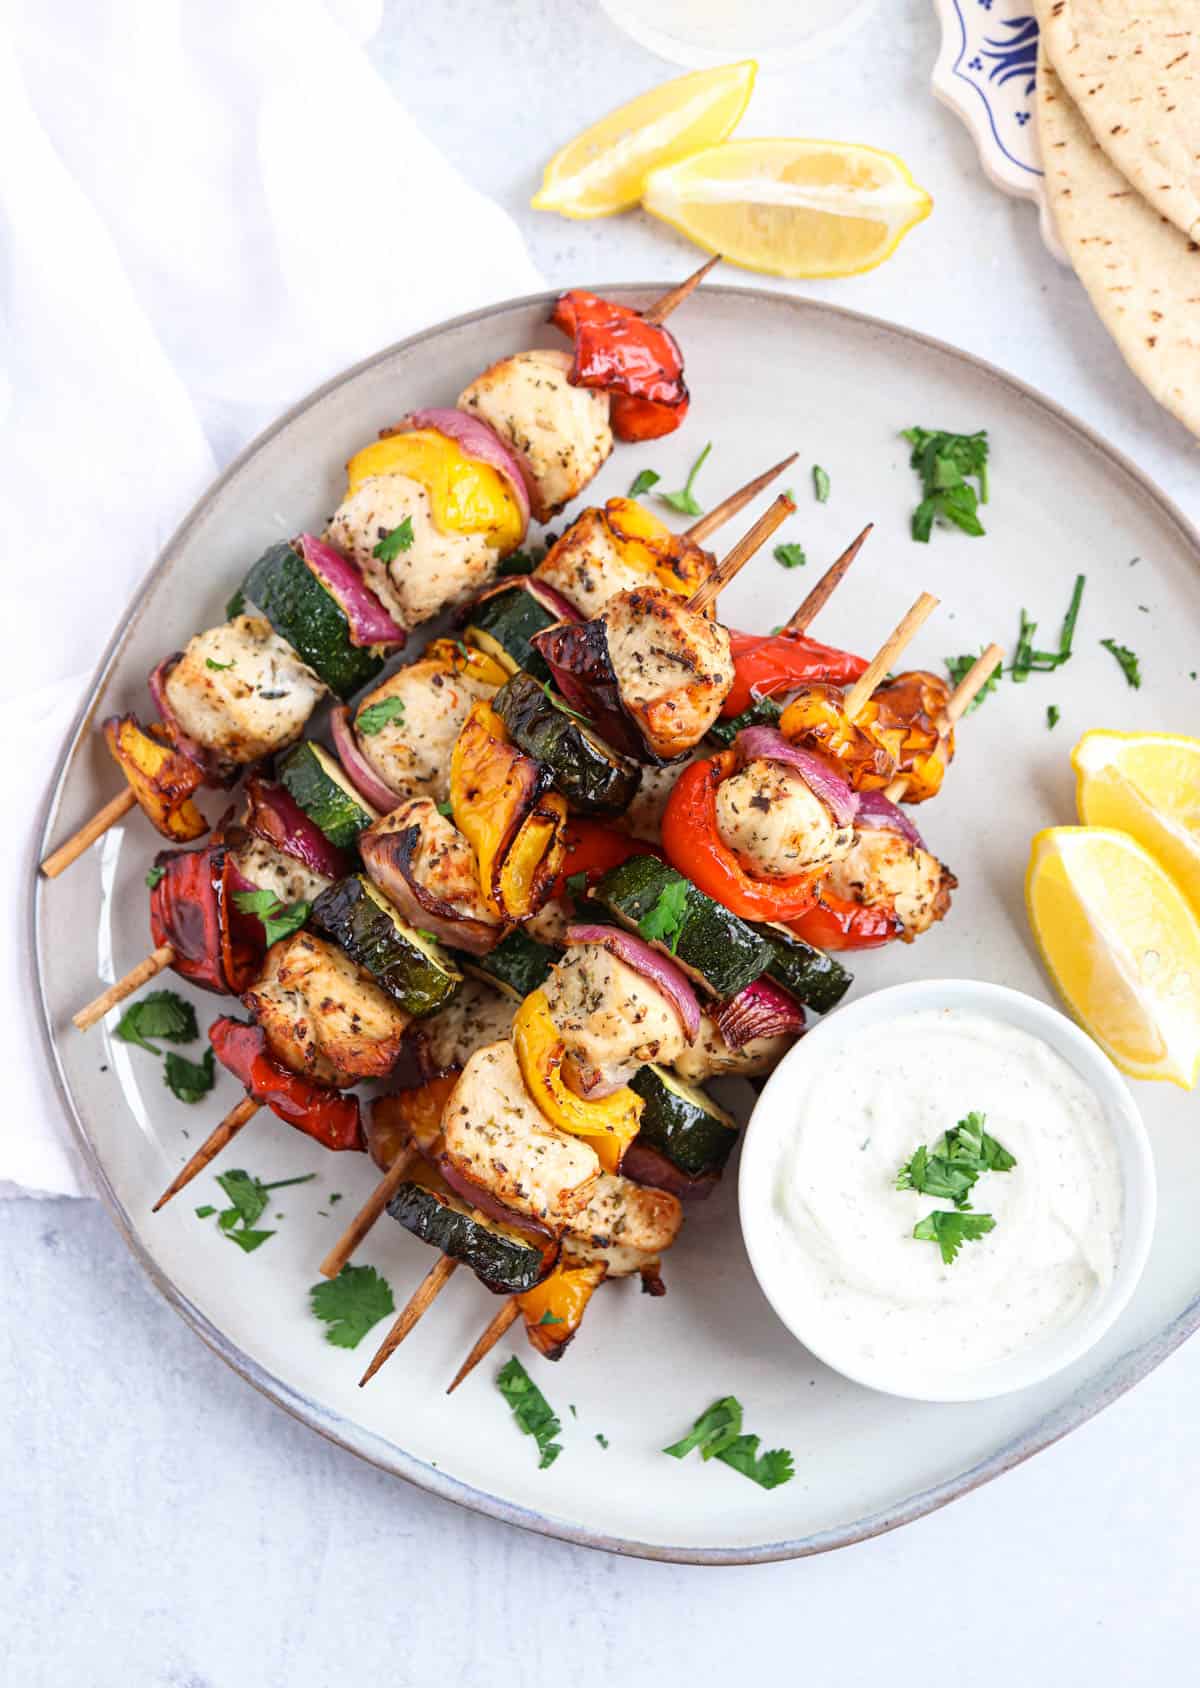 chicken and vegetable kebabs on wooden skewers stacked on a gray plate with a side of ranch dip and lemon wedges.